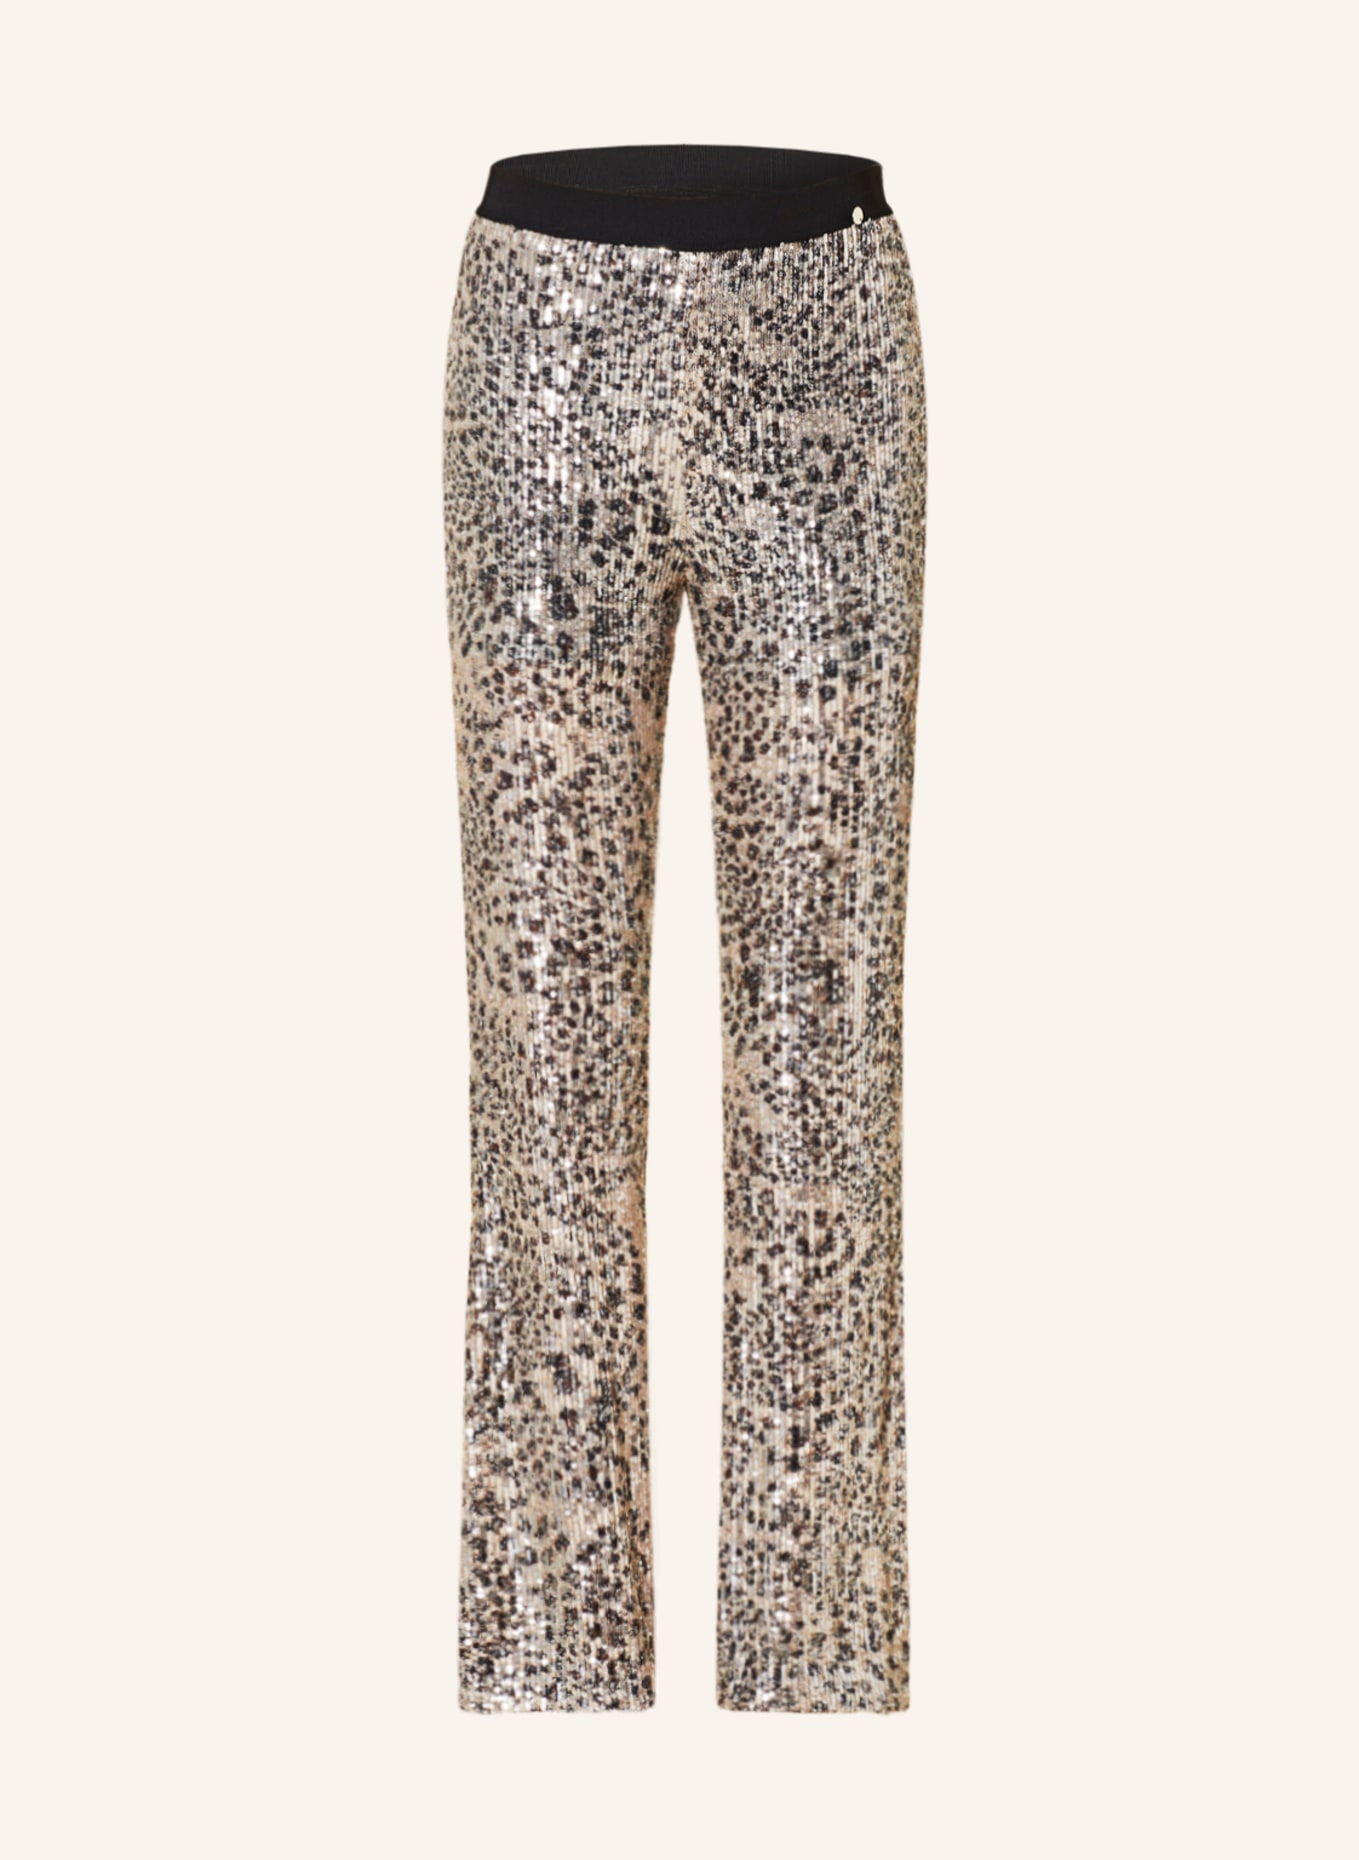 LIU JO Trousers with sequins, Color: GRAY/ WHITE GOLD (Image 1)